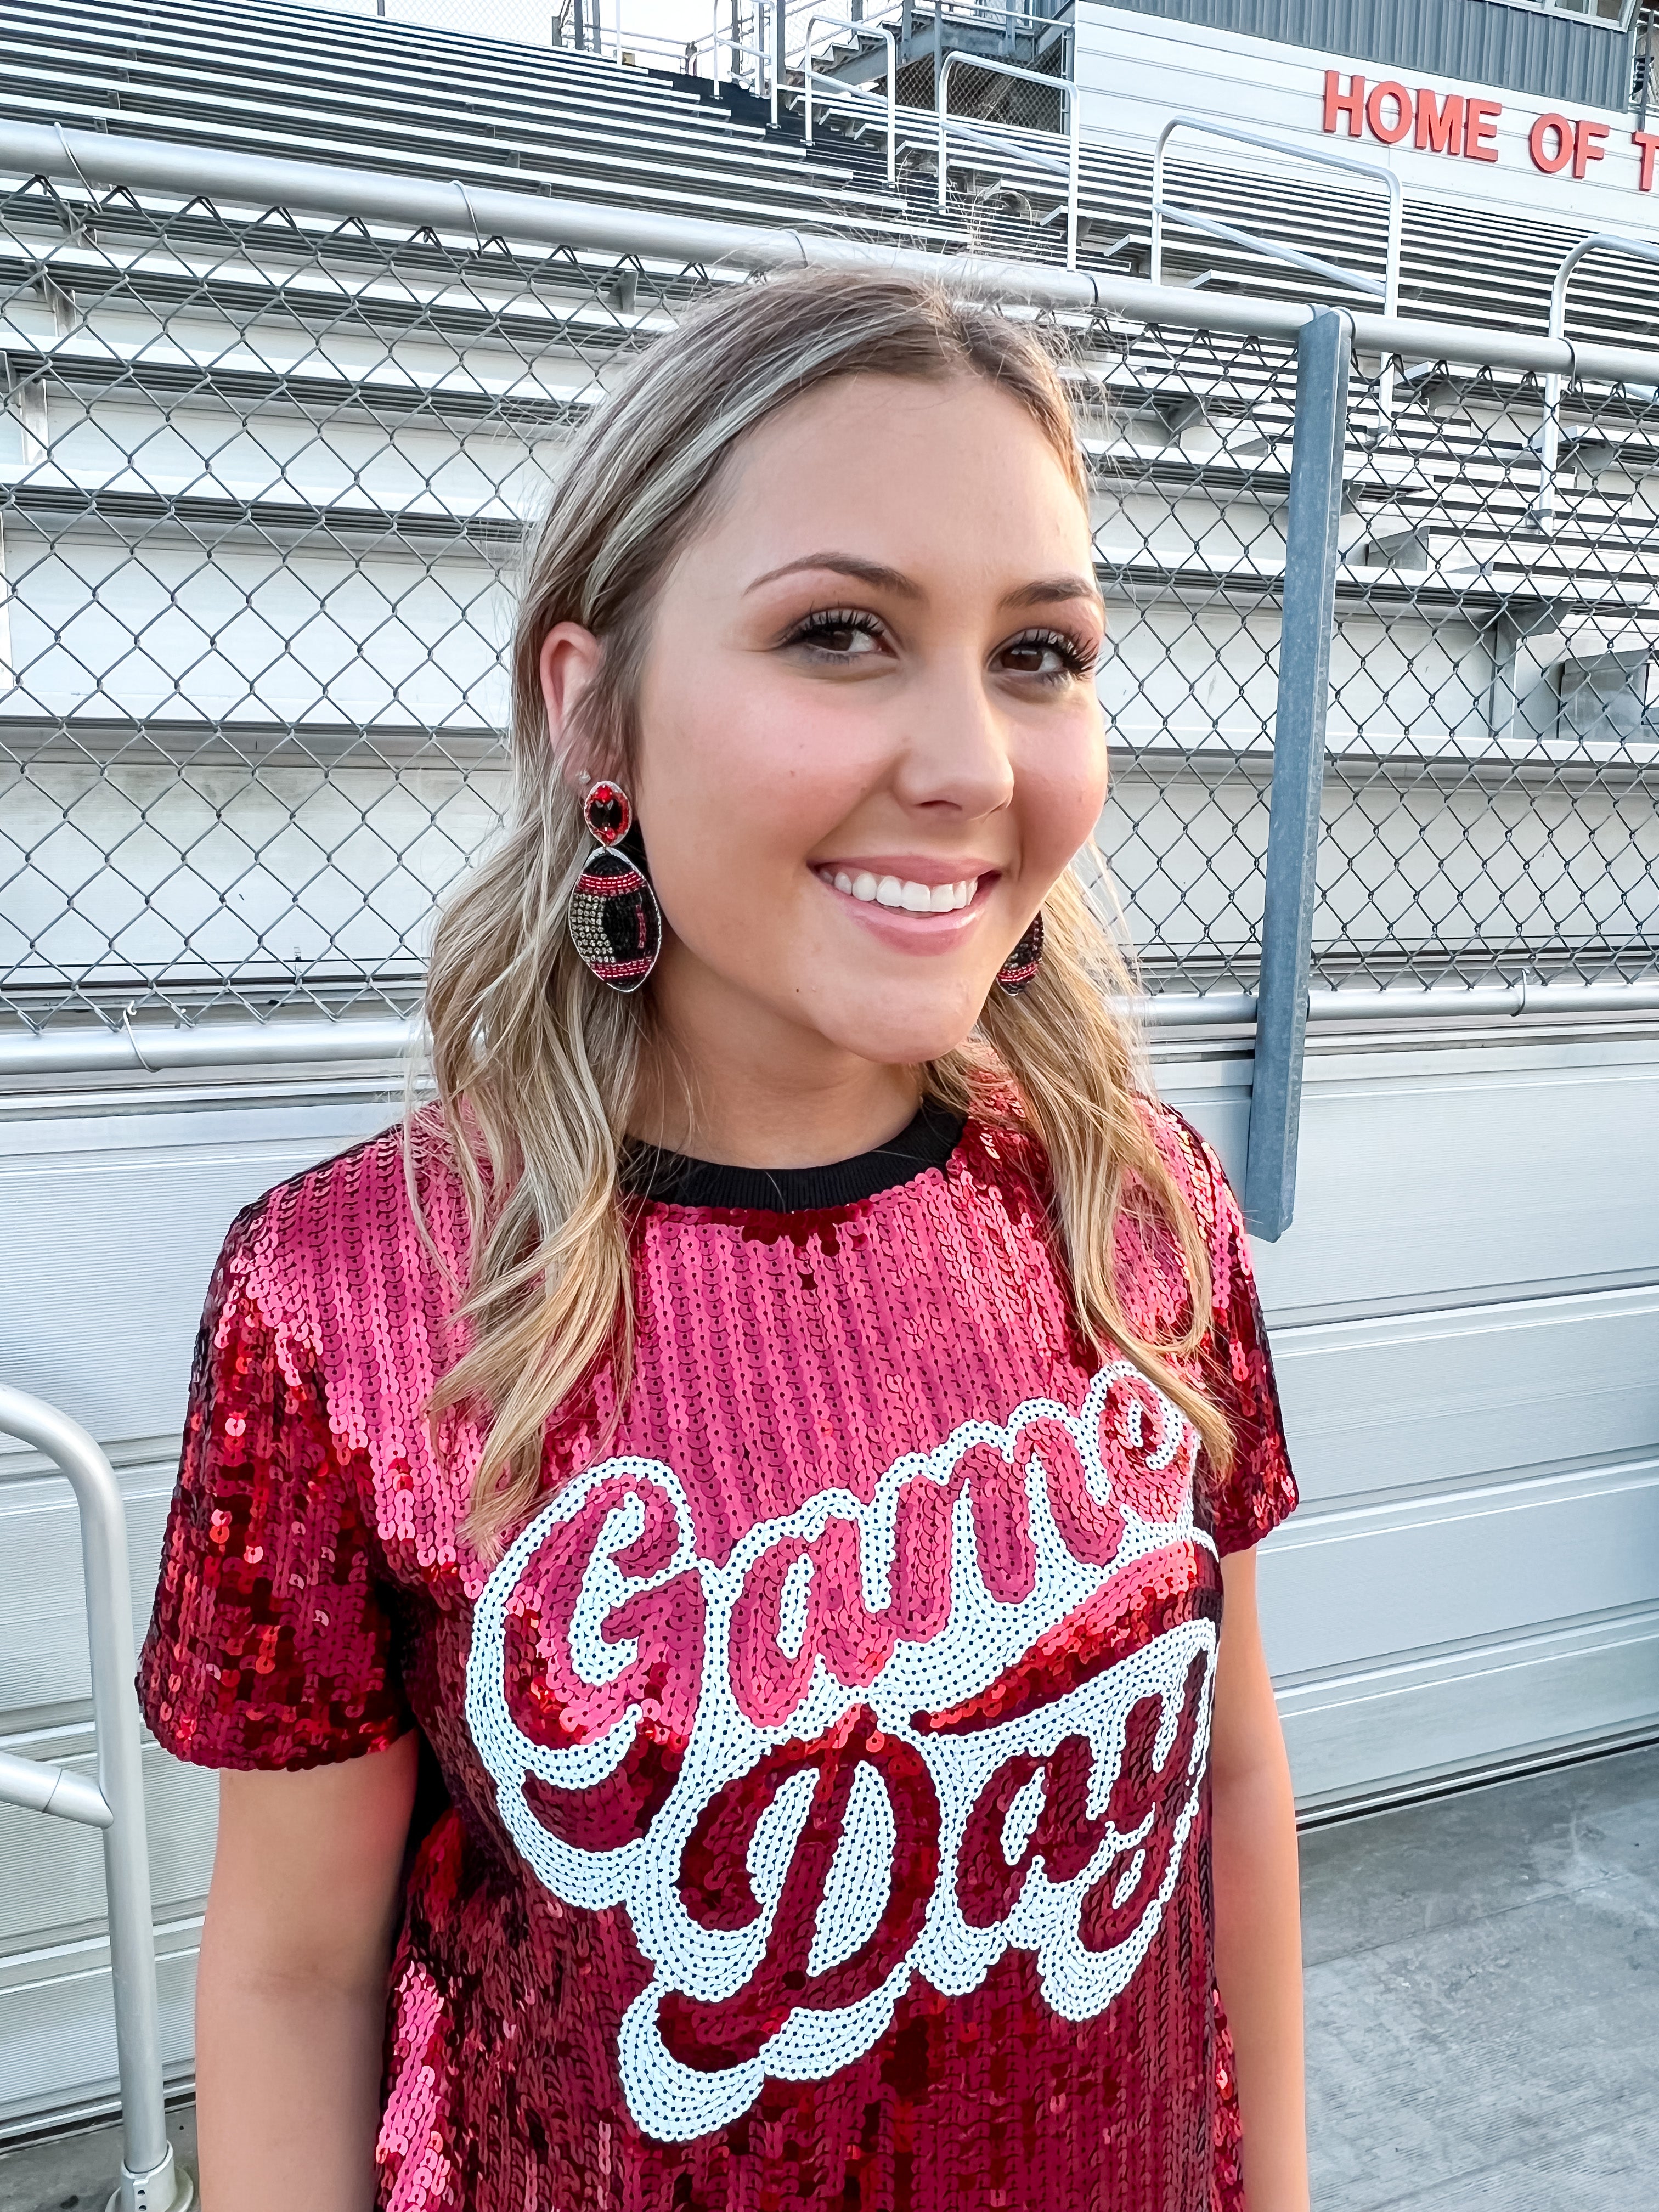 Game Day Sequin Top-Red/White